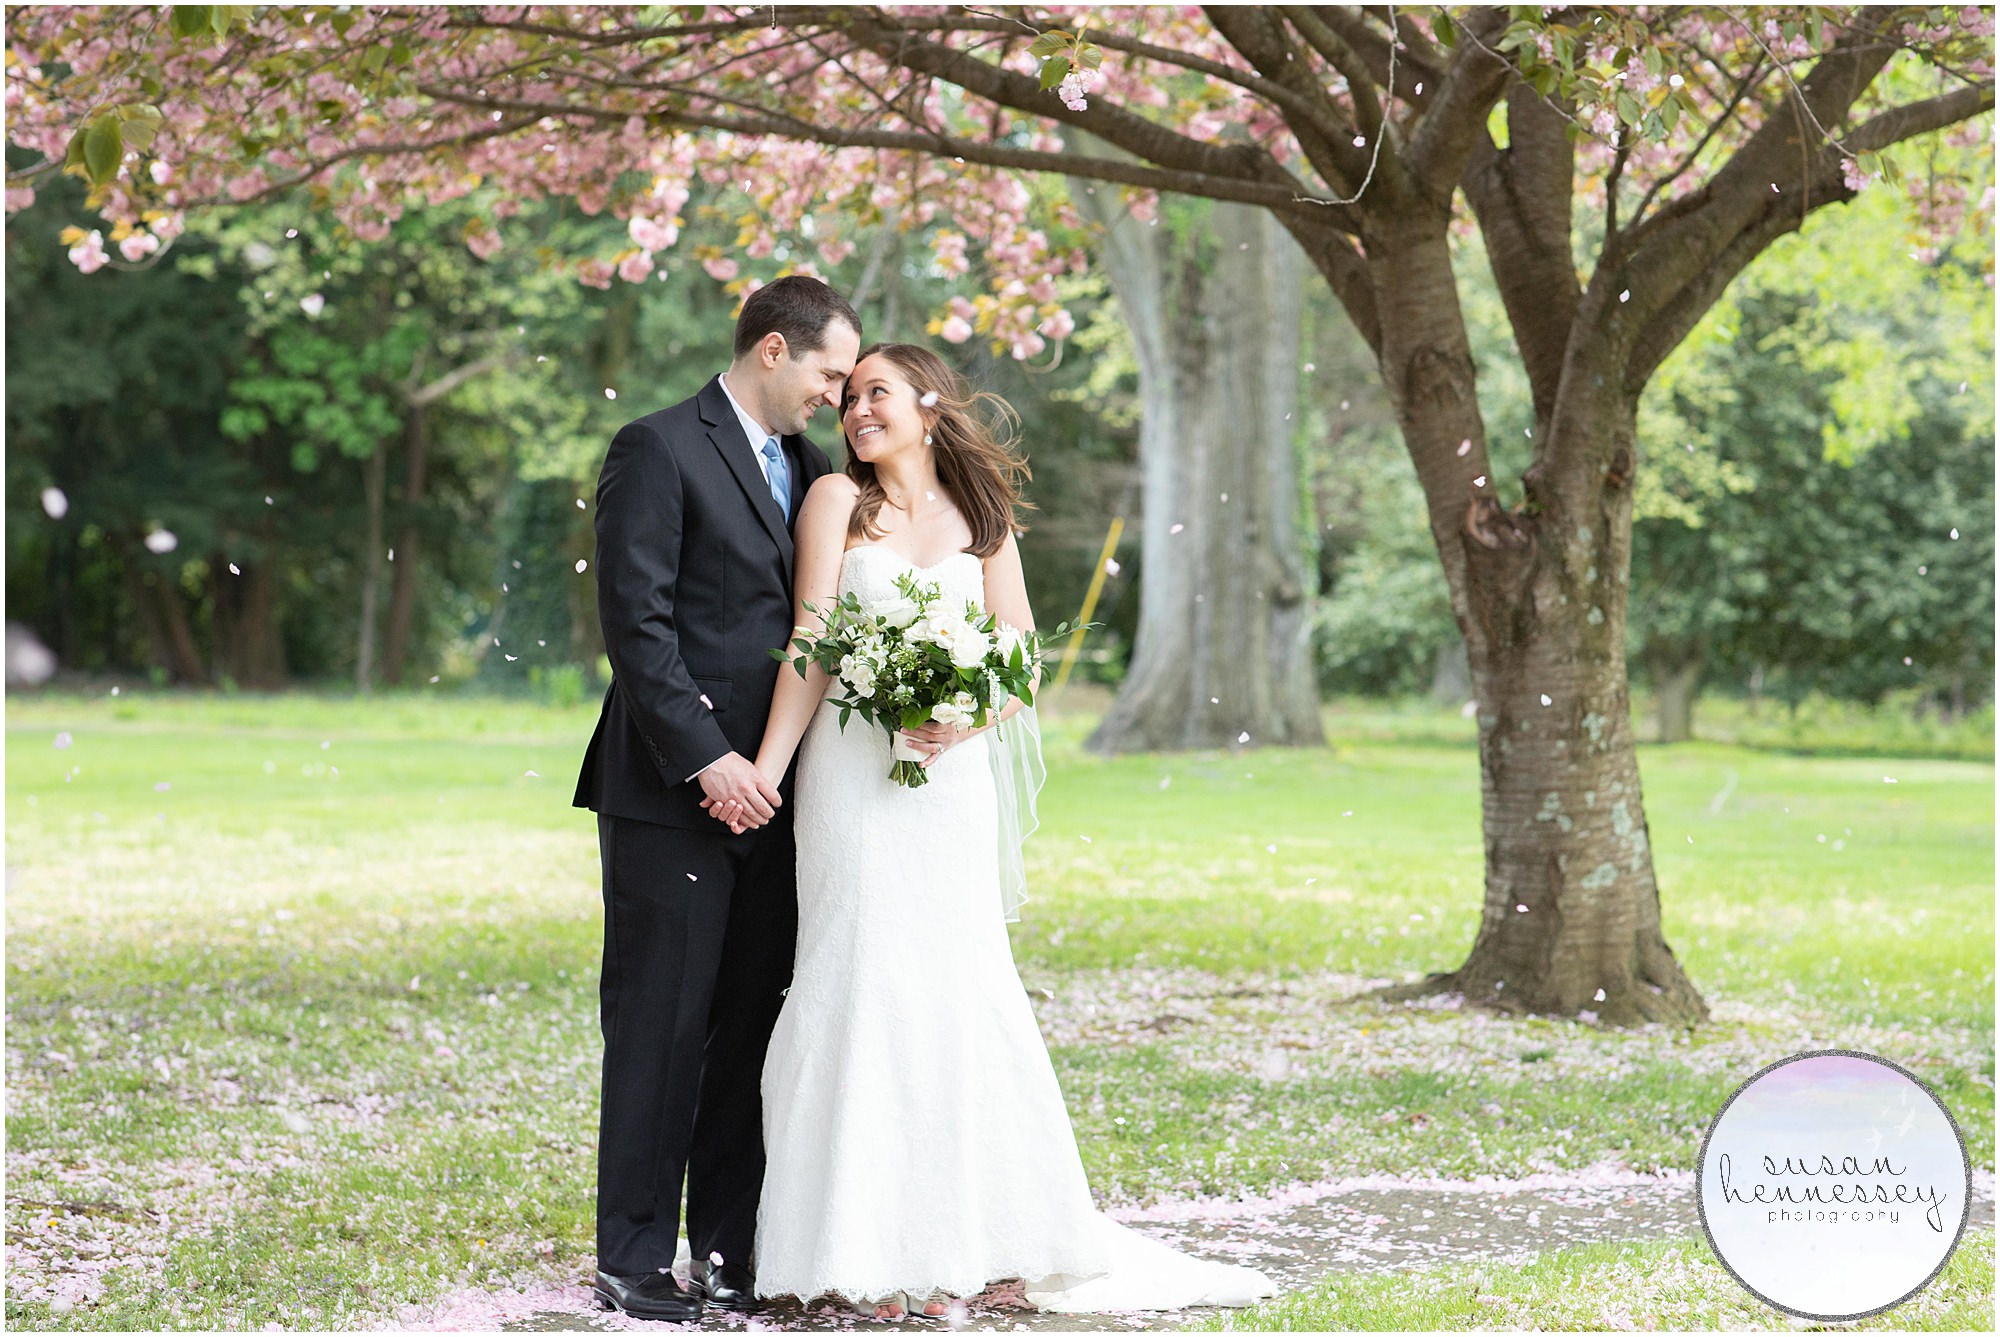 Spring NJ Micro Wedding with cherry blossoms